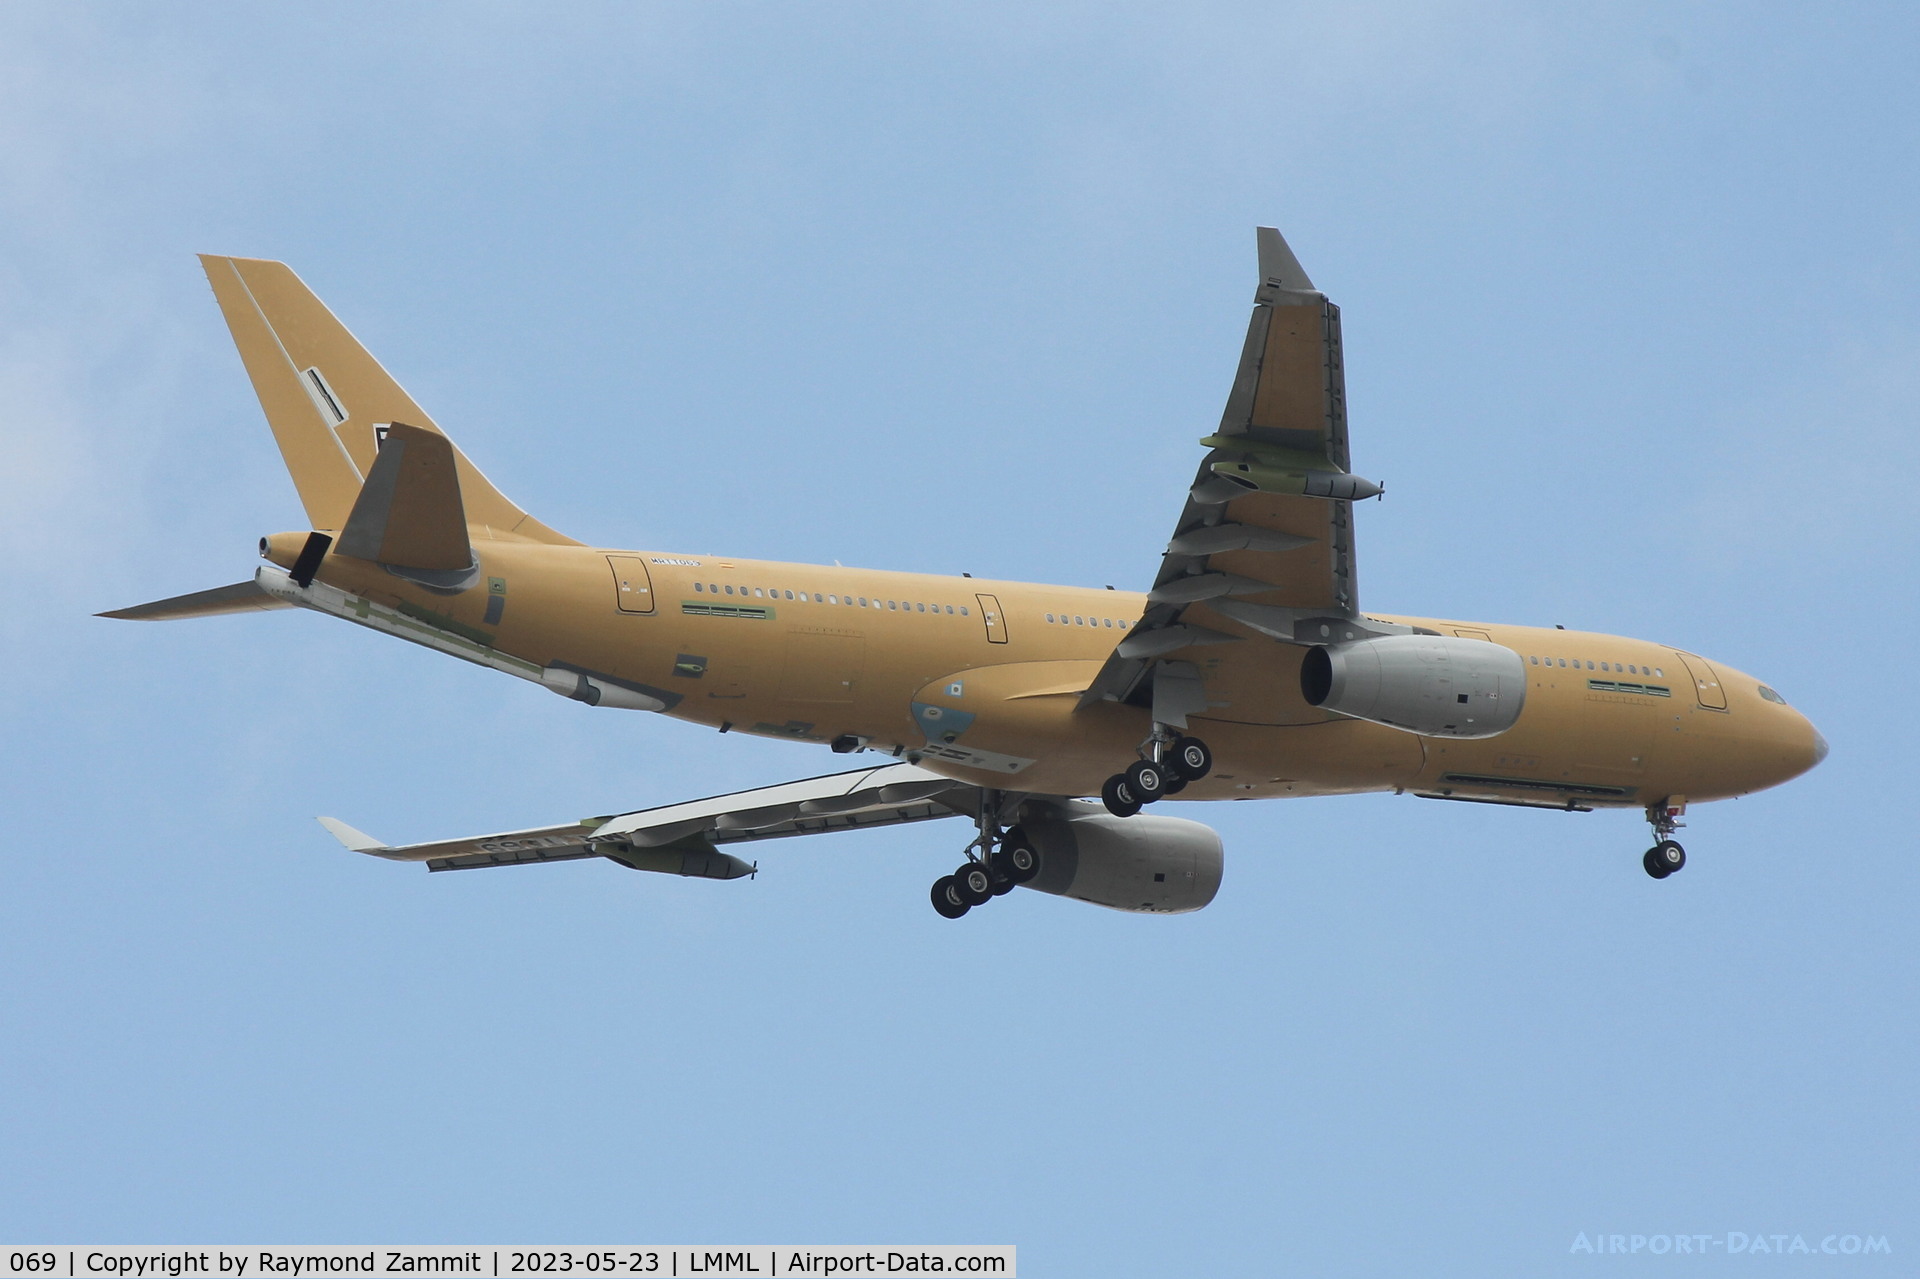 069, 2021 Airbus 330-243 (MRTT) Phenix C/N 2015, A330-243MRTT 069/F12 landing in Malta Rw13 for repainting in French Air Force colours.